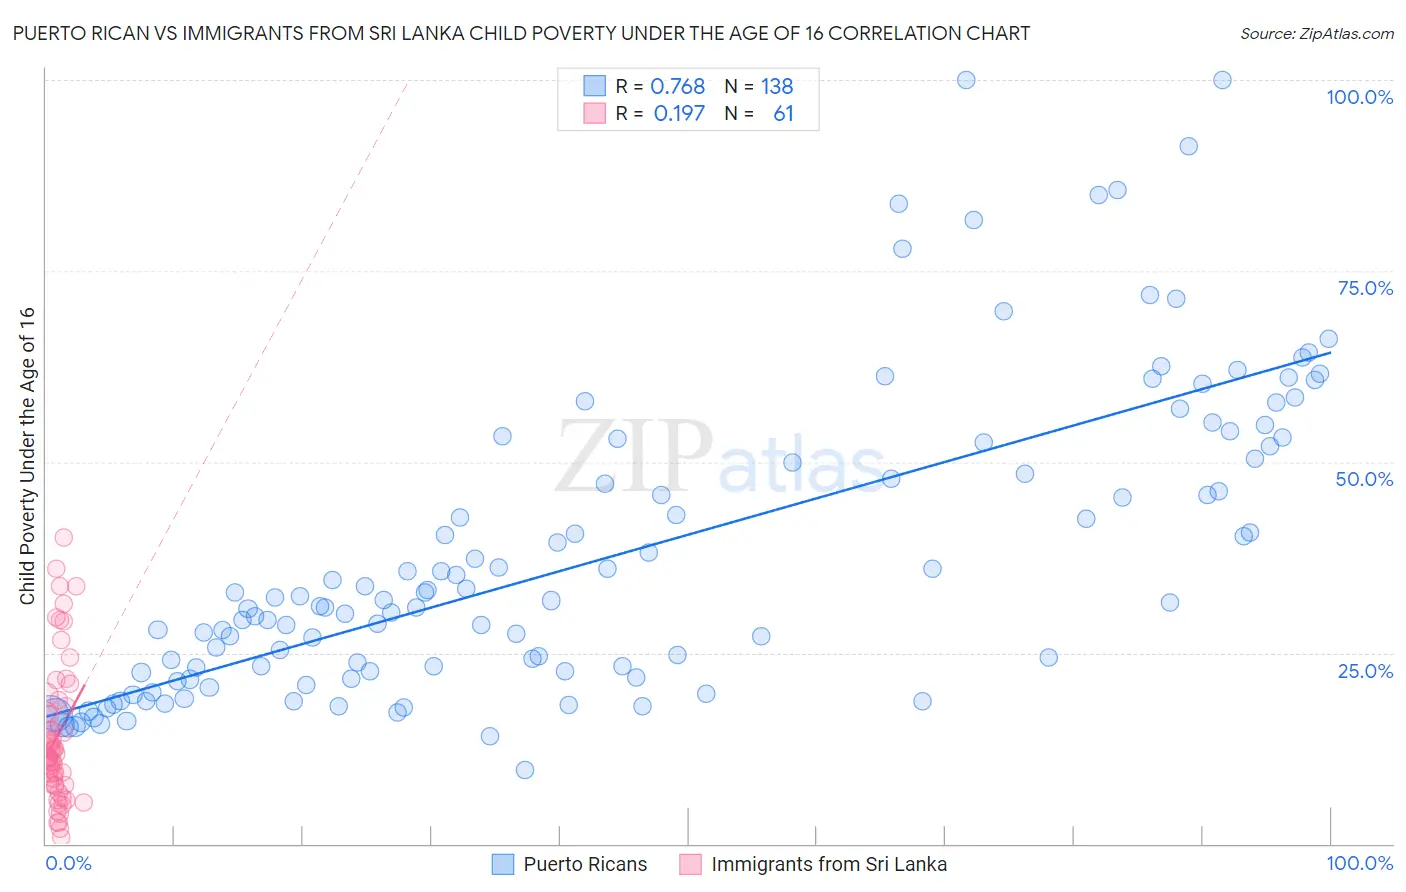 Puerto Rican vs Immigrants from Sri Lanka Child Poverty Under the Age of 16